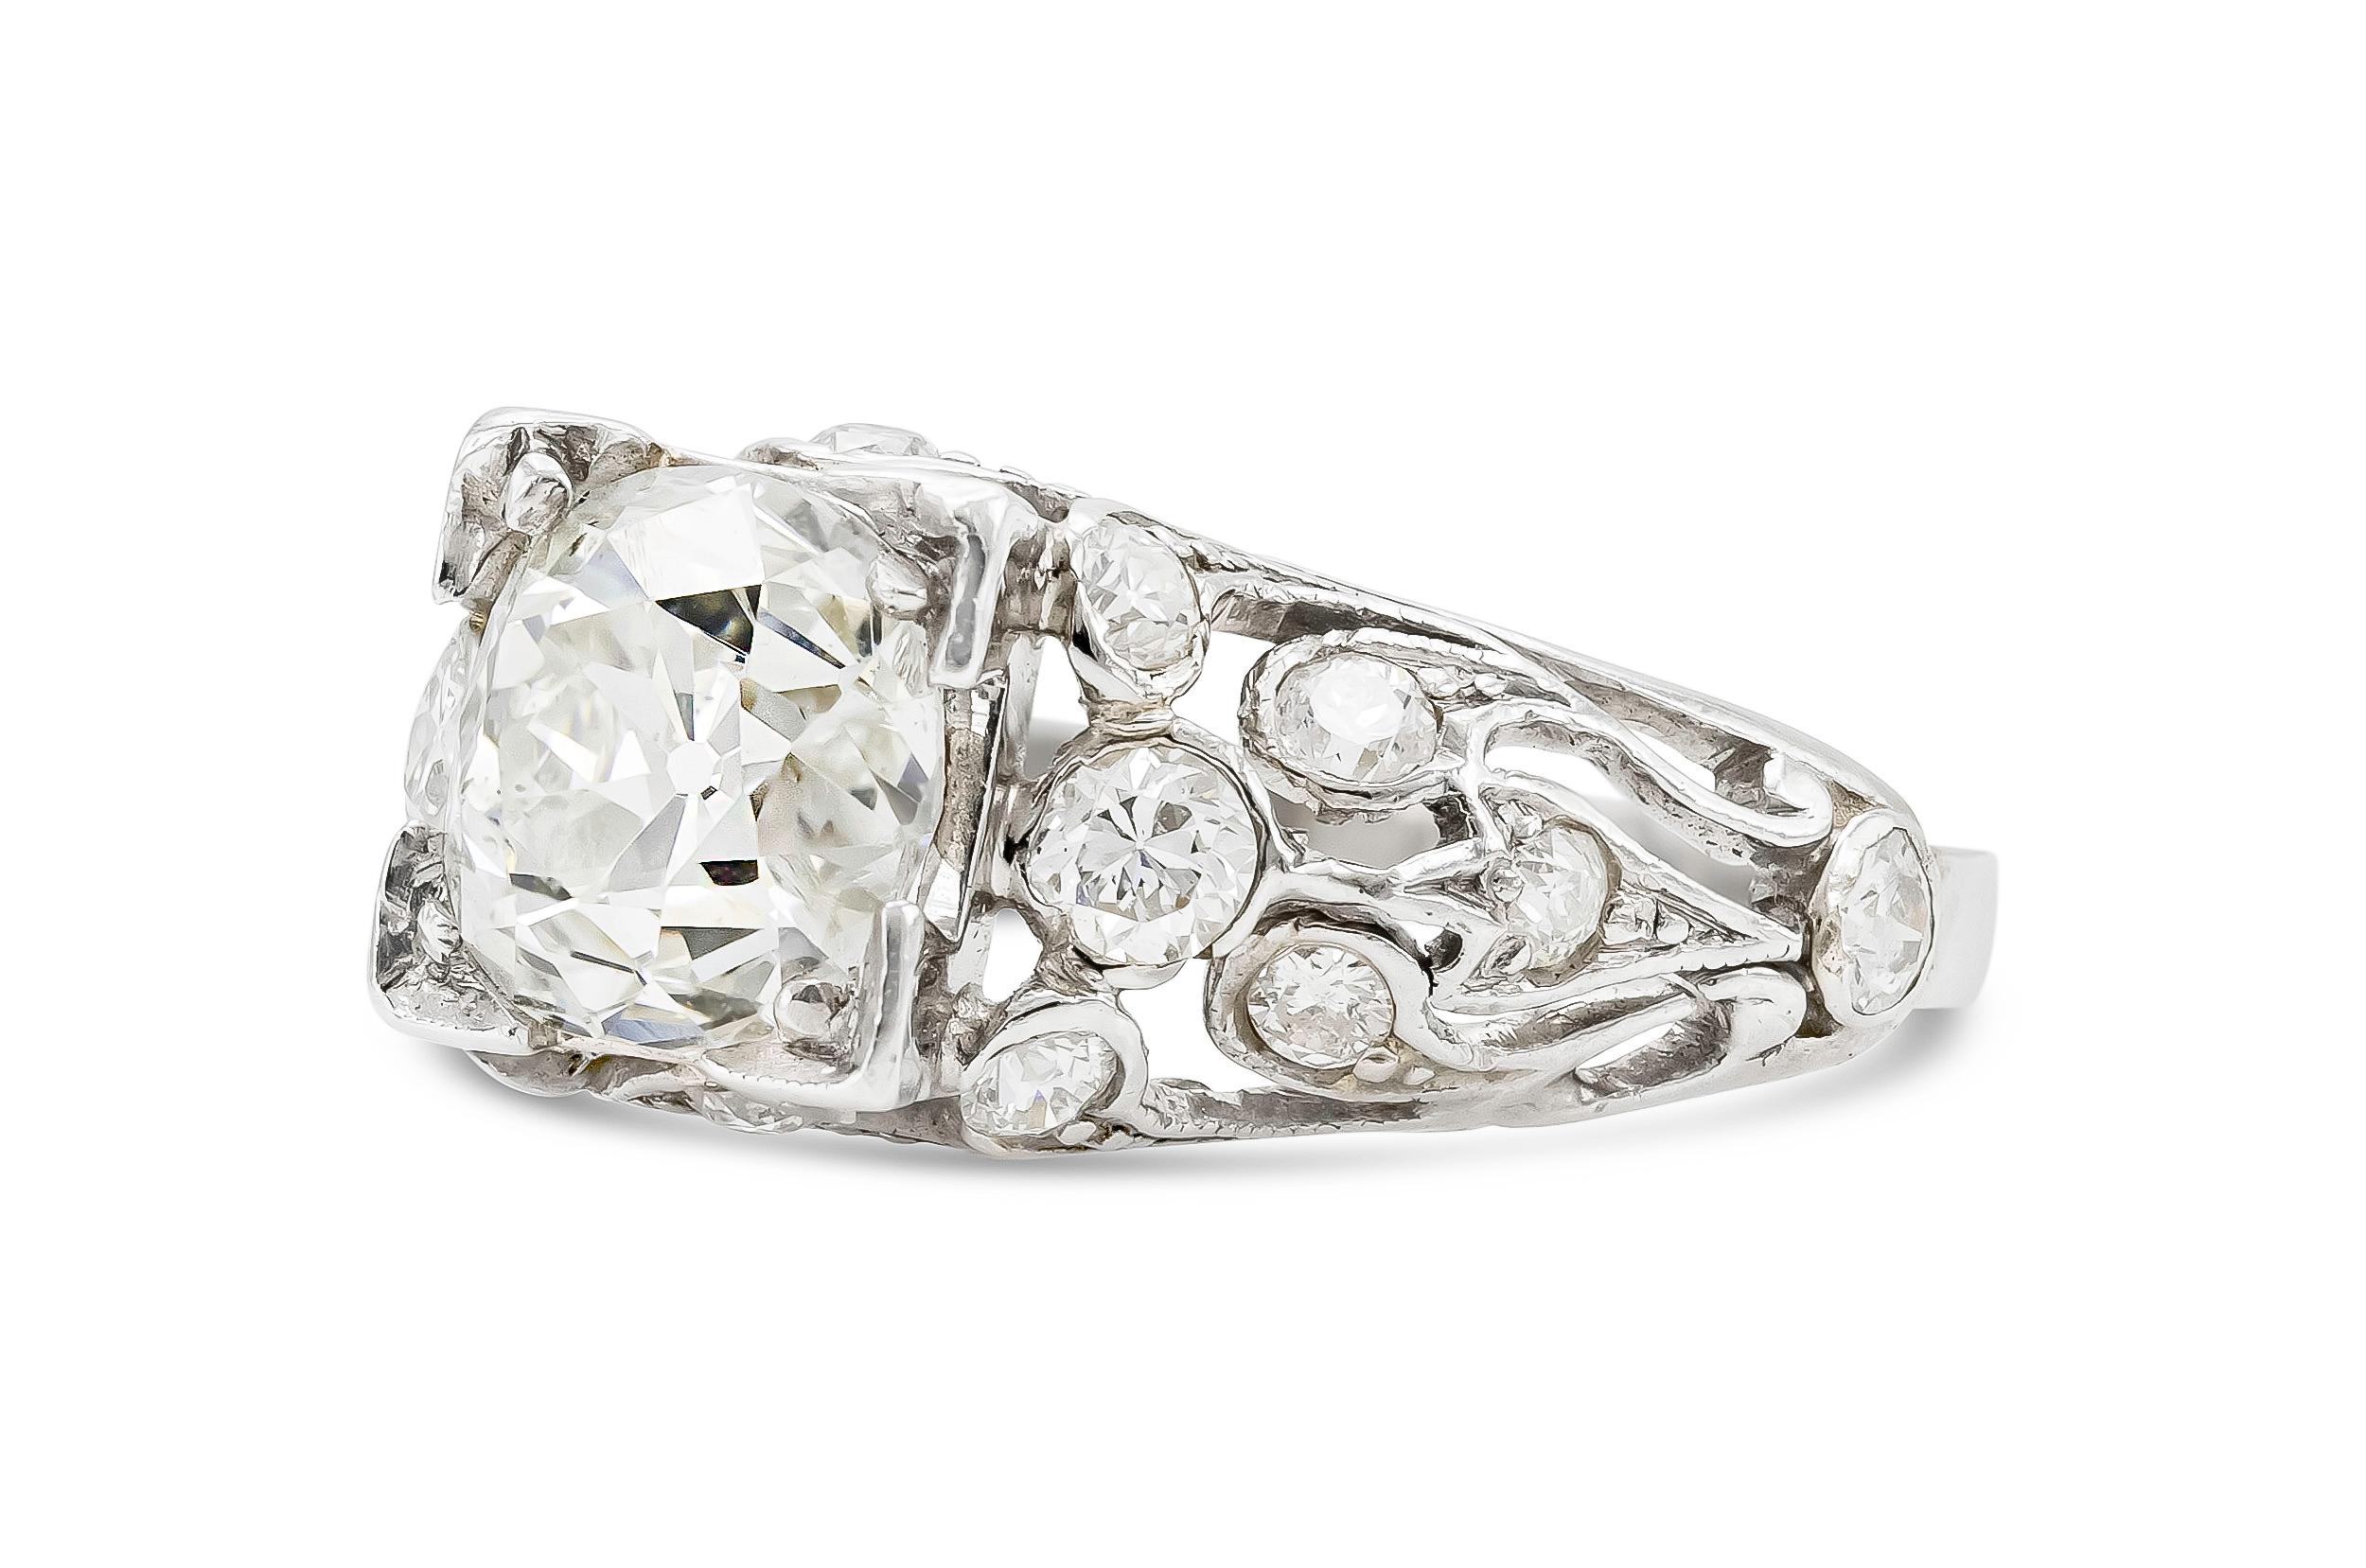 Finely crafted in platinum with an Old Mine cut center Diamond weighing  2.20 carats.
The setting features an additional 0.70 carats of diamonds.
Size 5 3/4, resizable
Art deco, circa 1920s